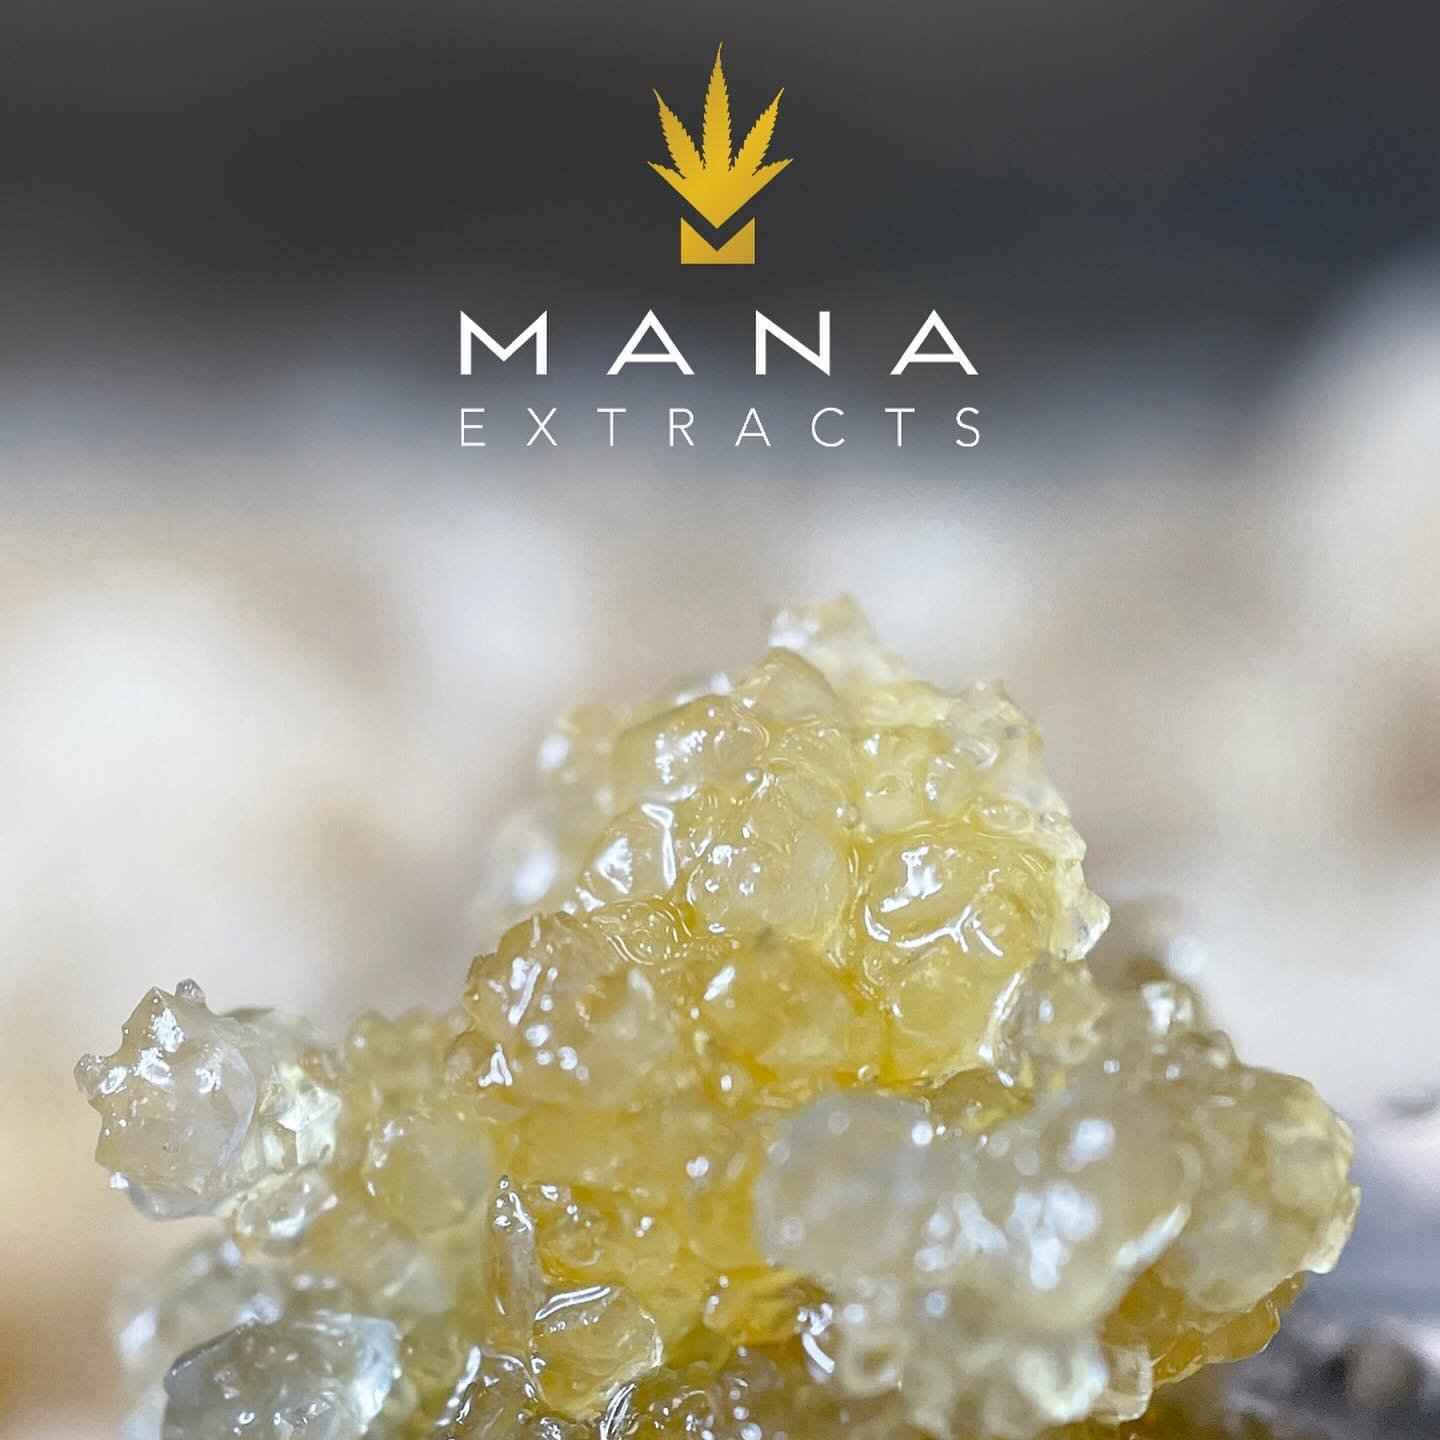 VENDORS at two Smooth Roots locations today, Friday May 10th!

Lincoln City: @mana.extracts 2-6pm
Greeley: @white_label_extracts_ 1-4pm